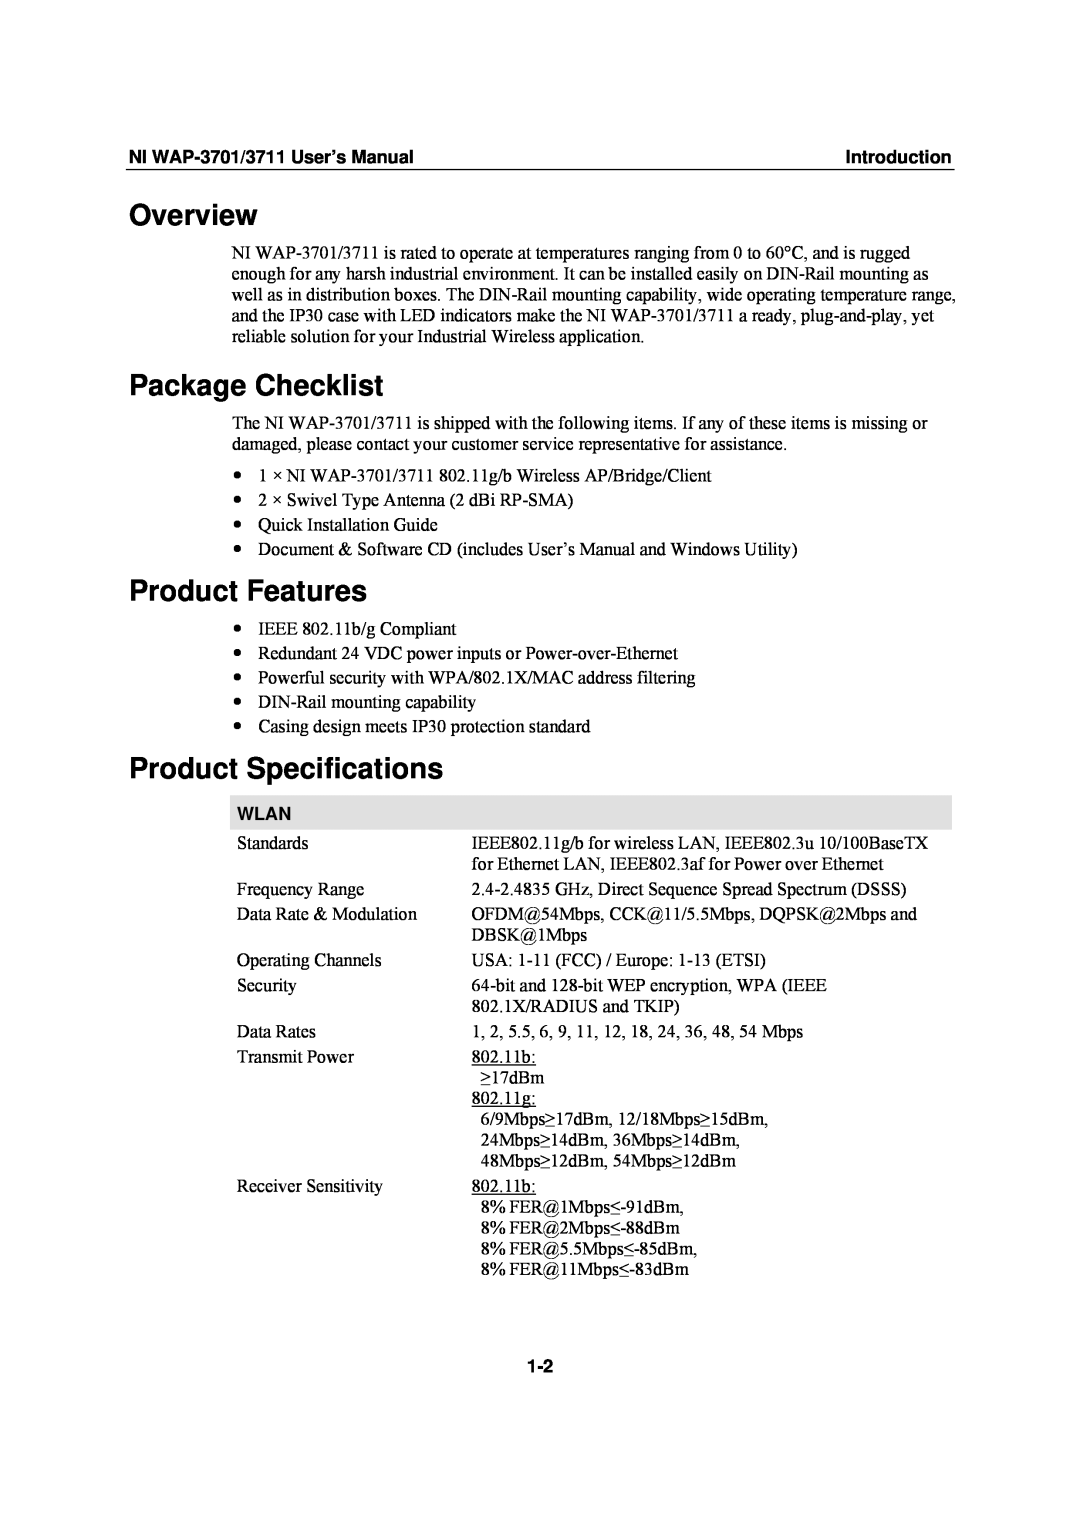 National Instruments WAP-3701 Overview, Package Checklist, Product Features, Product Specifications, Introduction, Wlan 